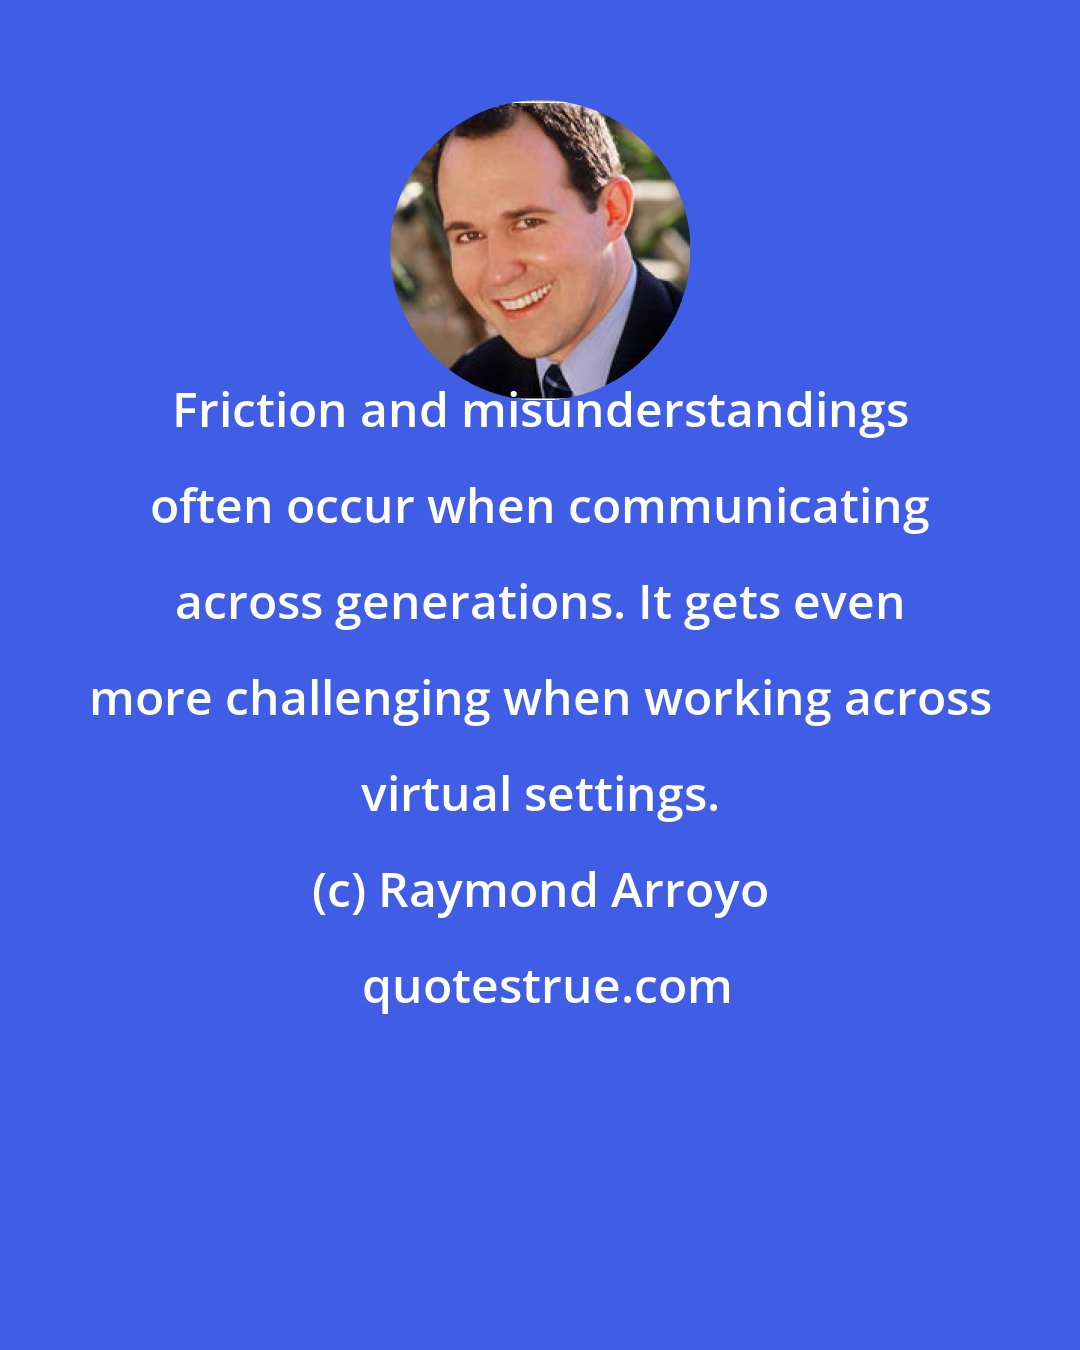 Raymond Arroyo: Friction and misunderstandings often occur when communicating across generations. It gets even more challenging when working across virtual settings.